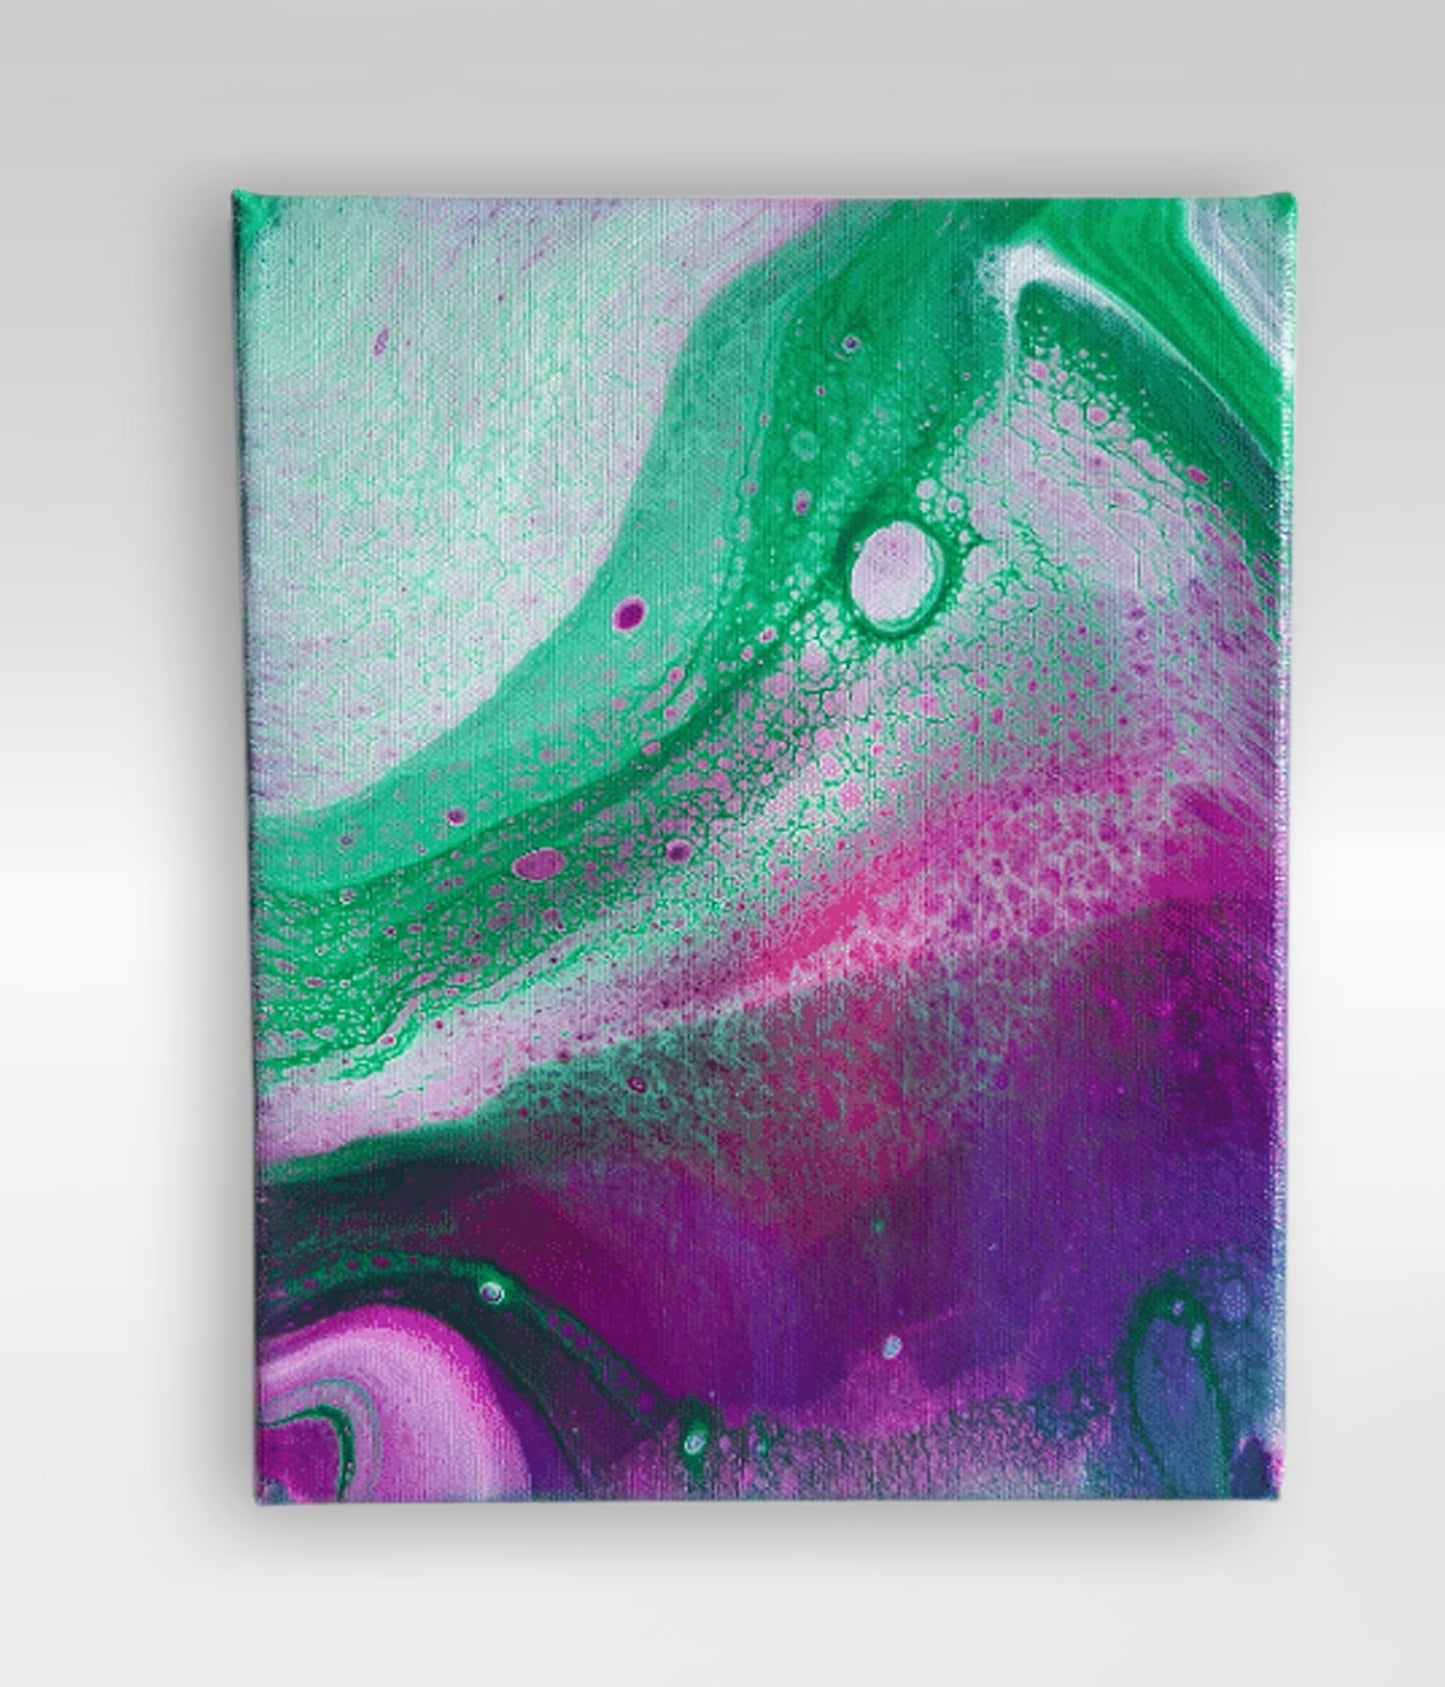 Nailed – 8 x 10 Acrylic Pour Painting On Canvas